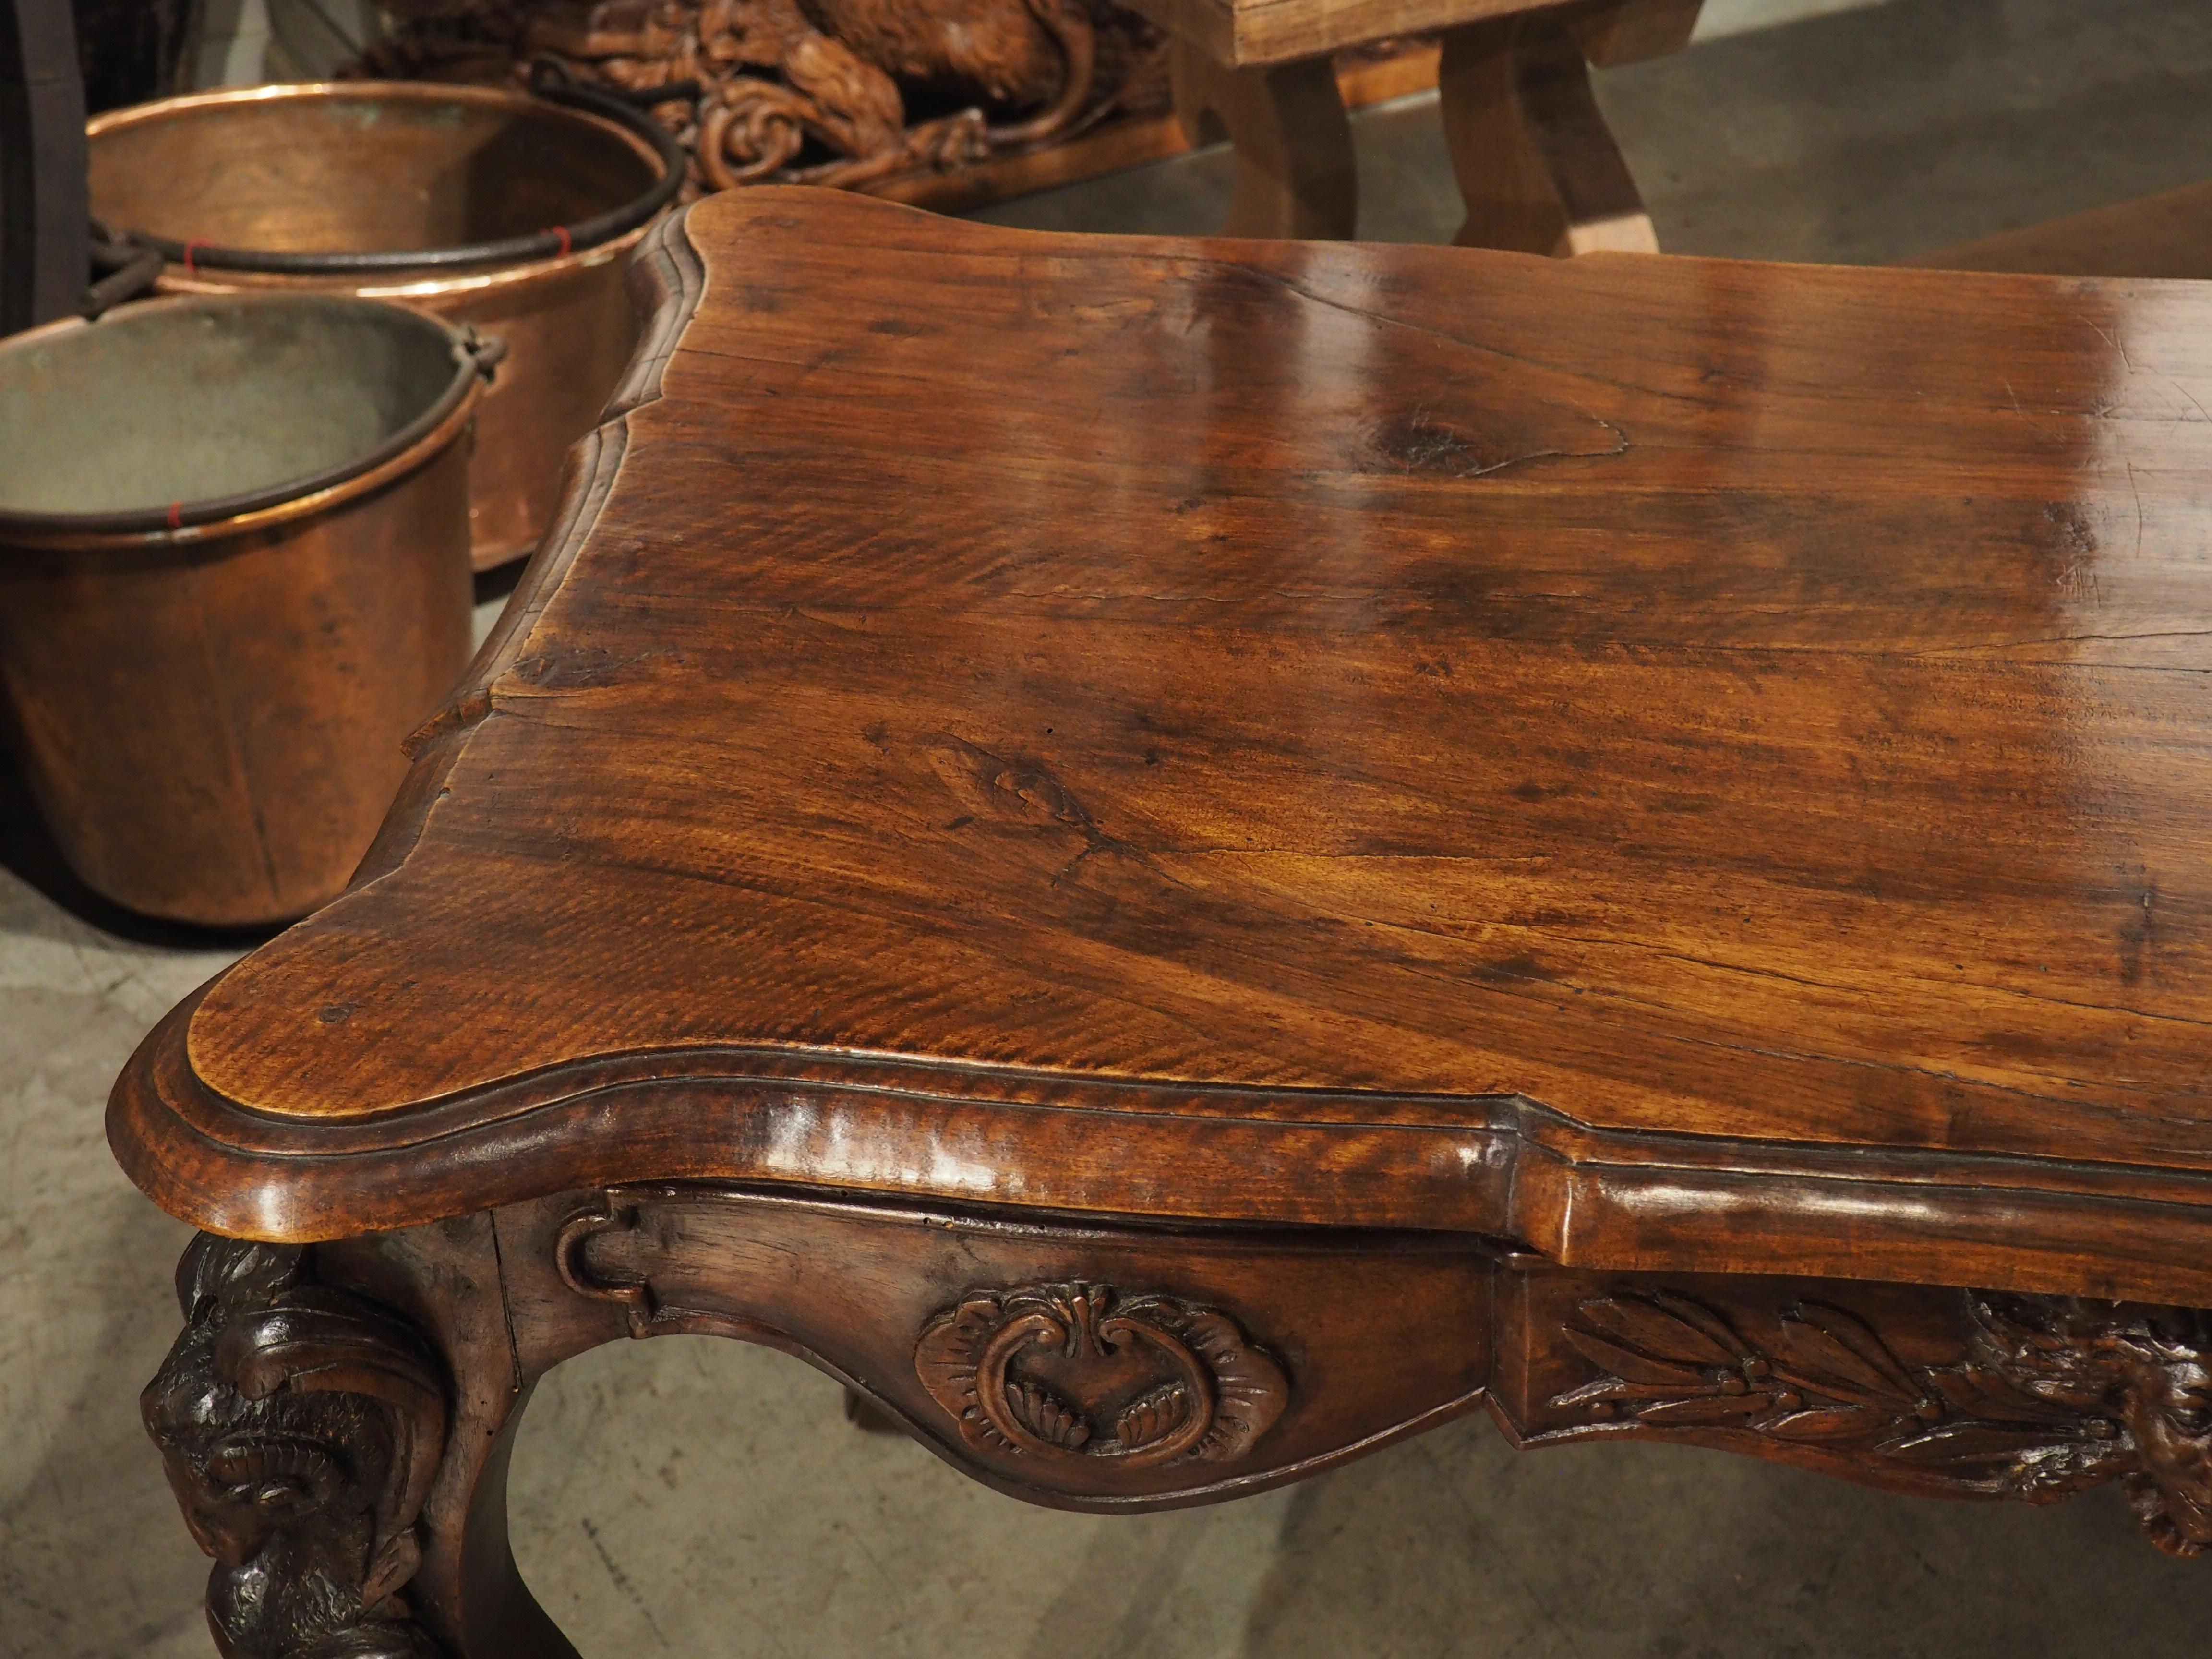 Circa 1870 French Walnut Wood Center Table with Rams' Heads and Fleur De Lys For Sale 5